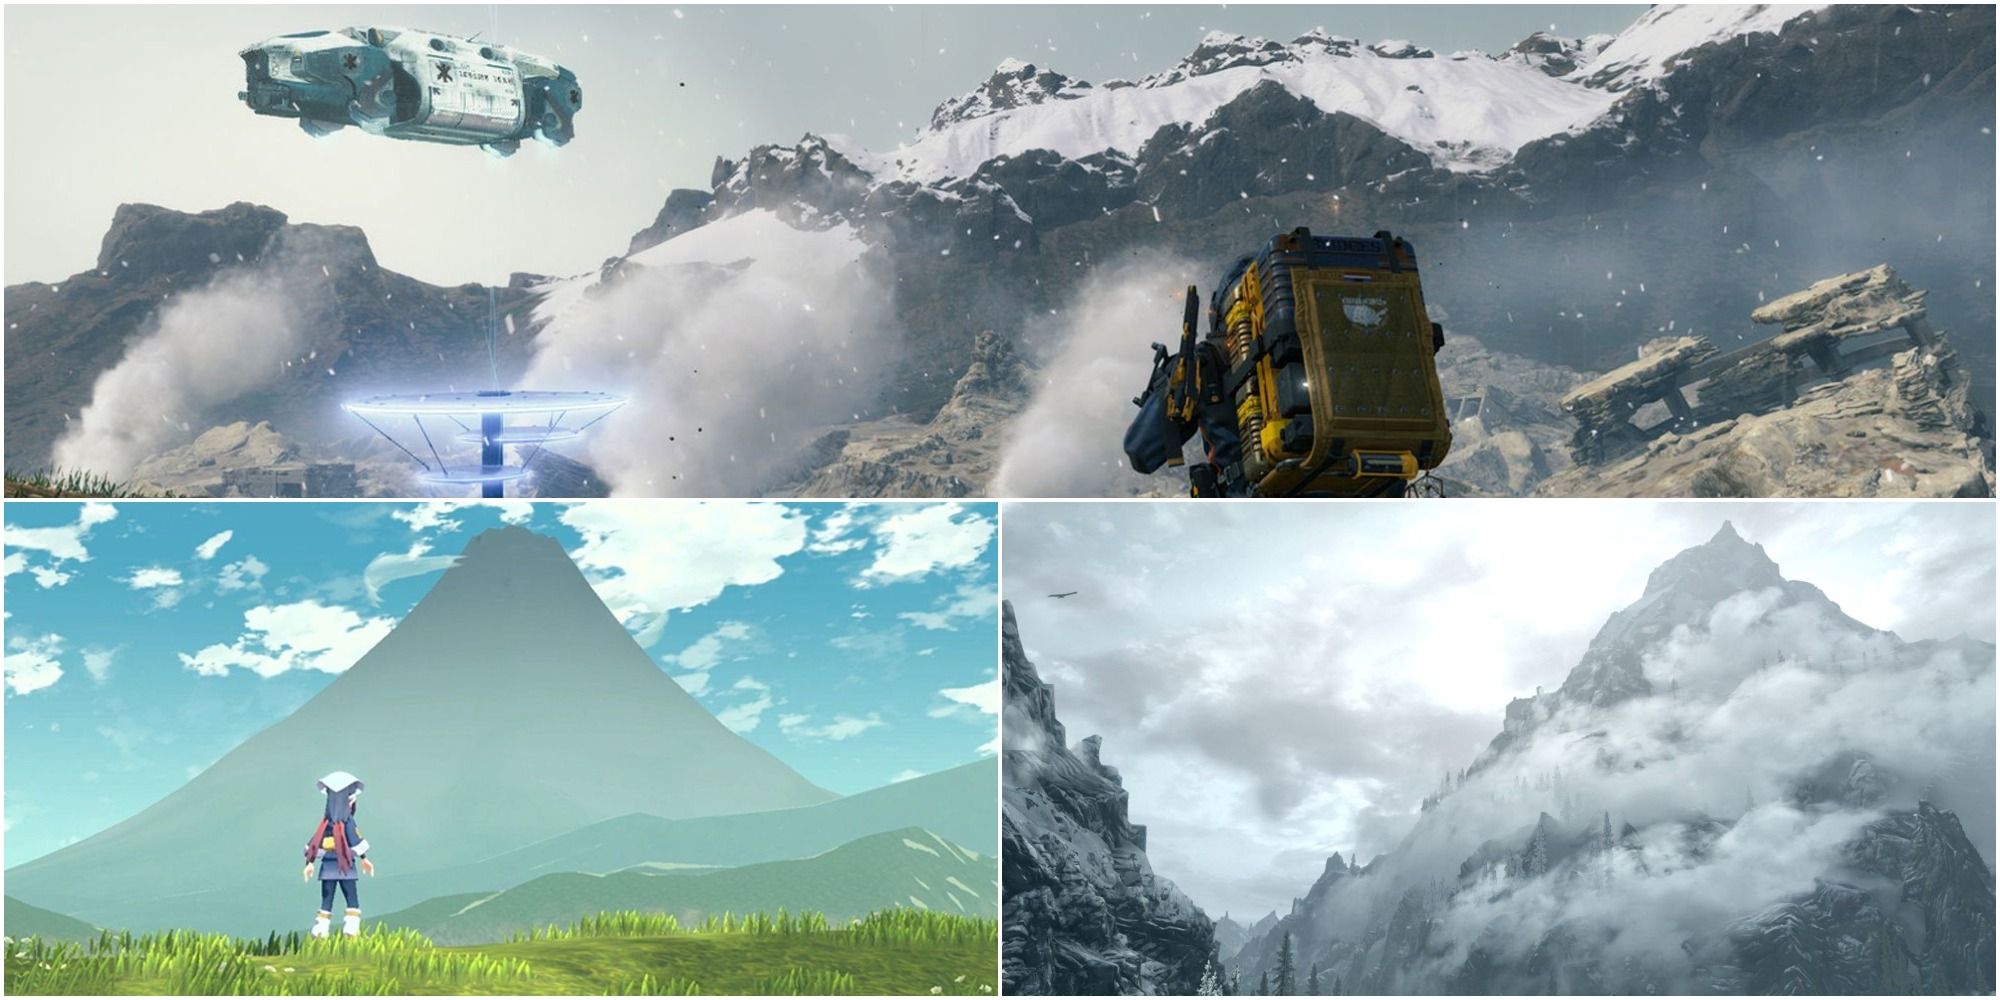 On the top, Sam walking towards a mountain with holograms in front of him. Bottom left, the player character looking at Mt Coronet in the distance. Bottom Right, the throat of the world from skyrim